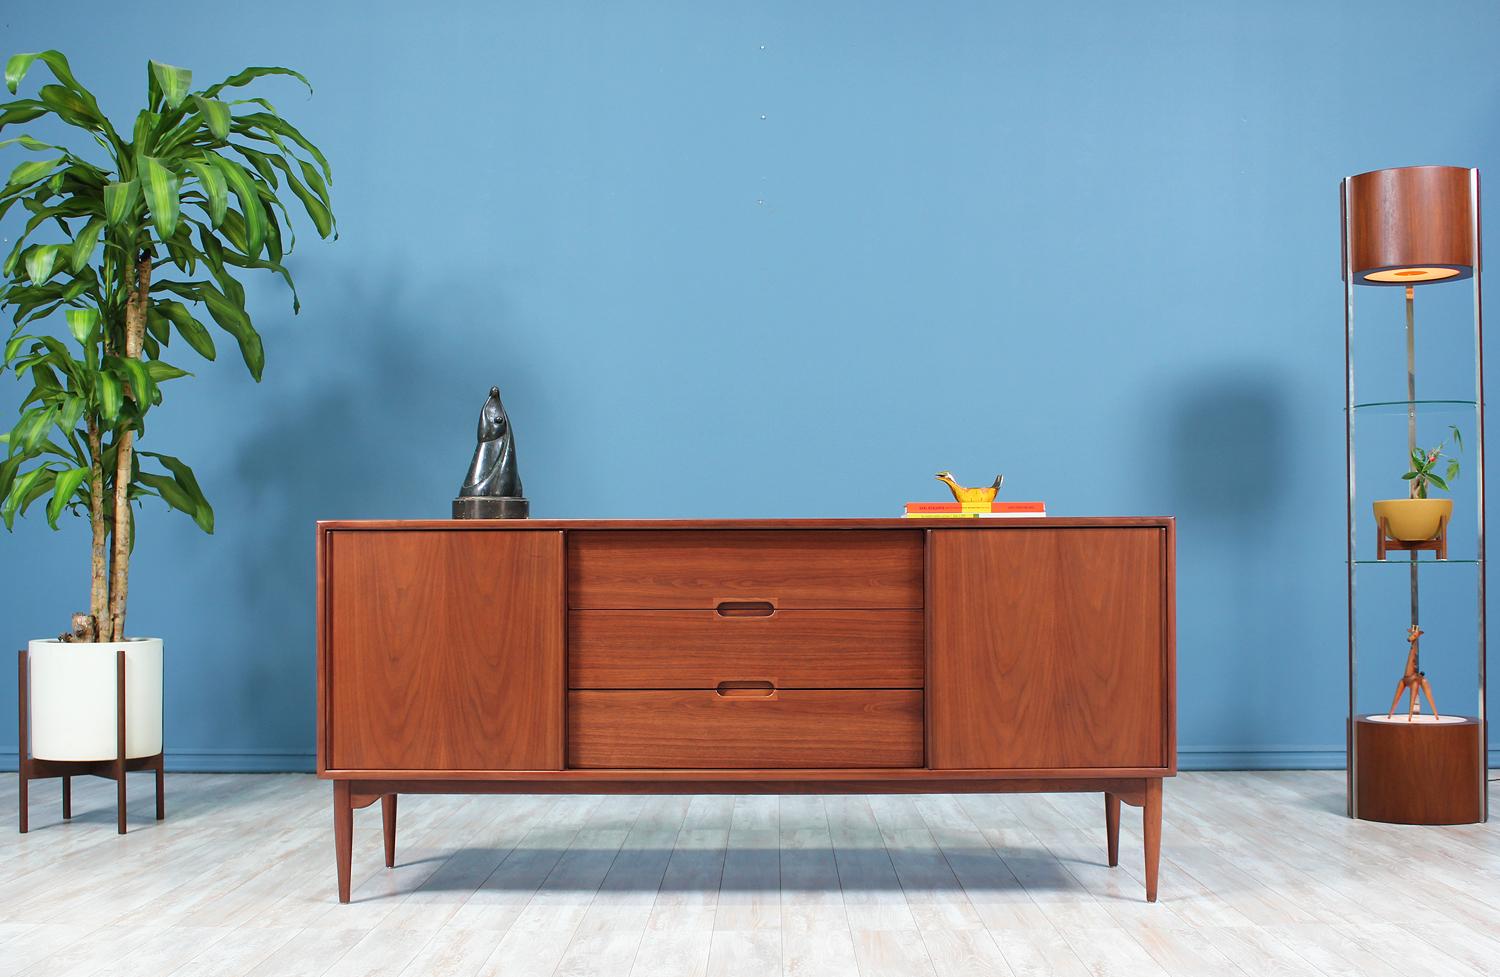 Gorgeous walnut credenza designed by John Keal for Brown Saltman in the United States circa 1950’s. A stunning piece crafted in walnut wood with beautiful grain detail sitting on a sculptural base that adds a playful and organic modern profile. This